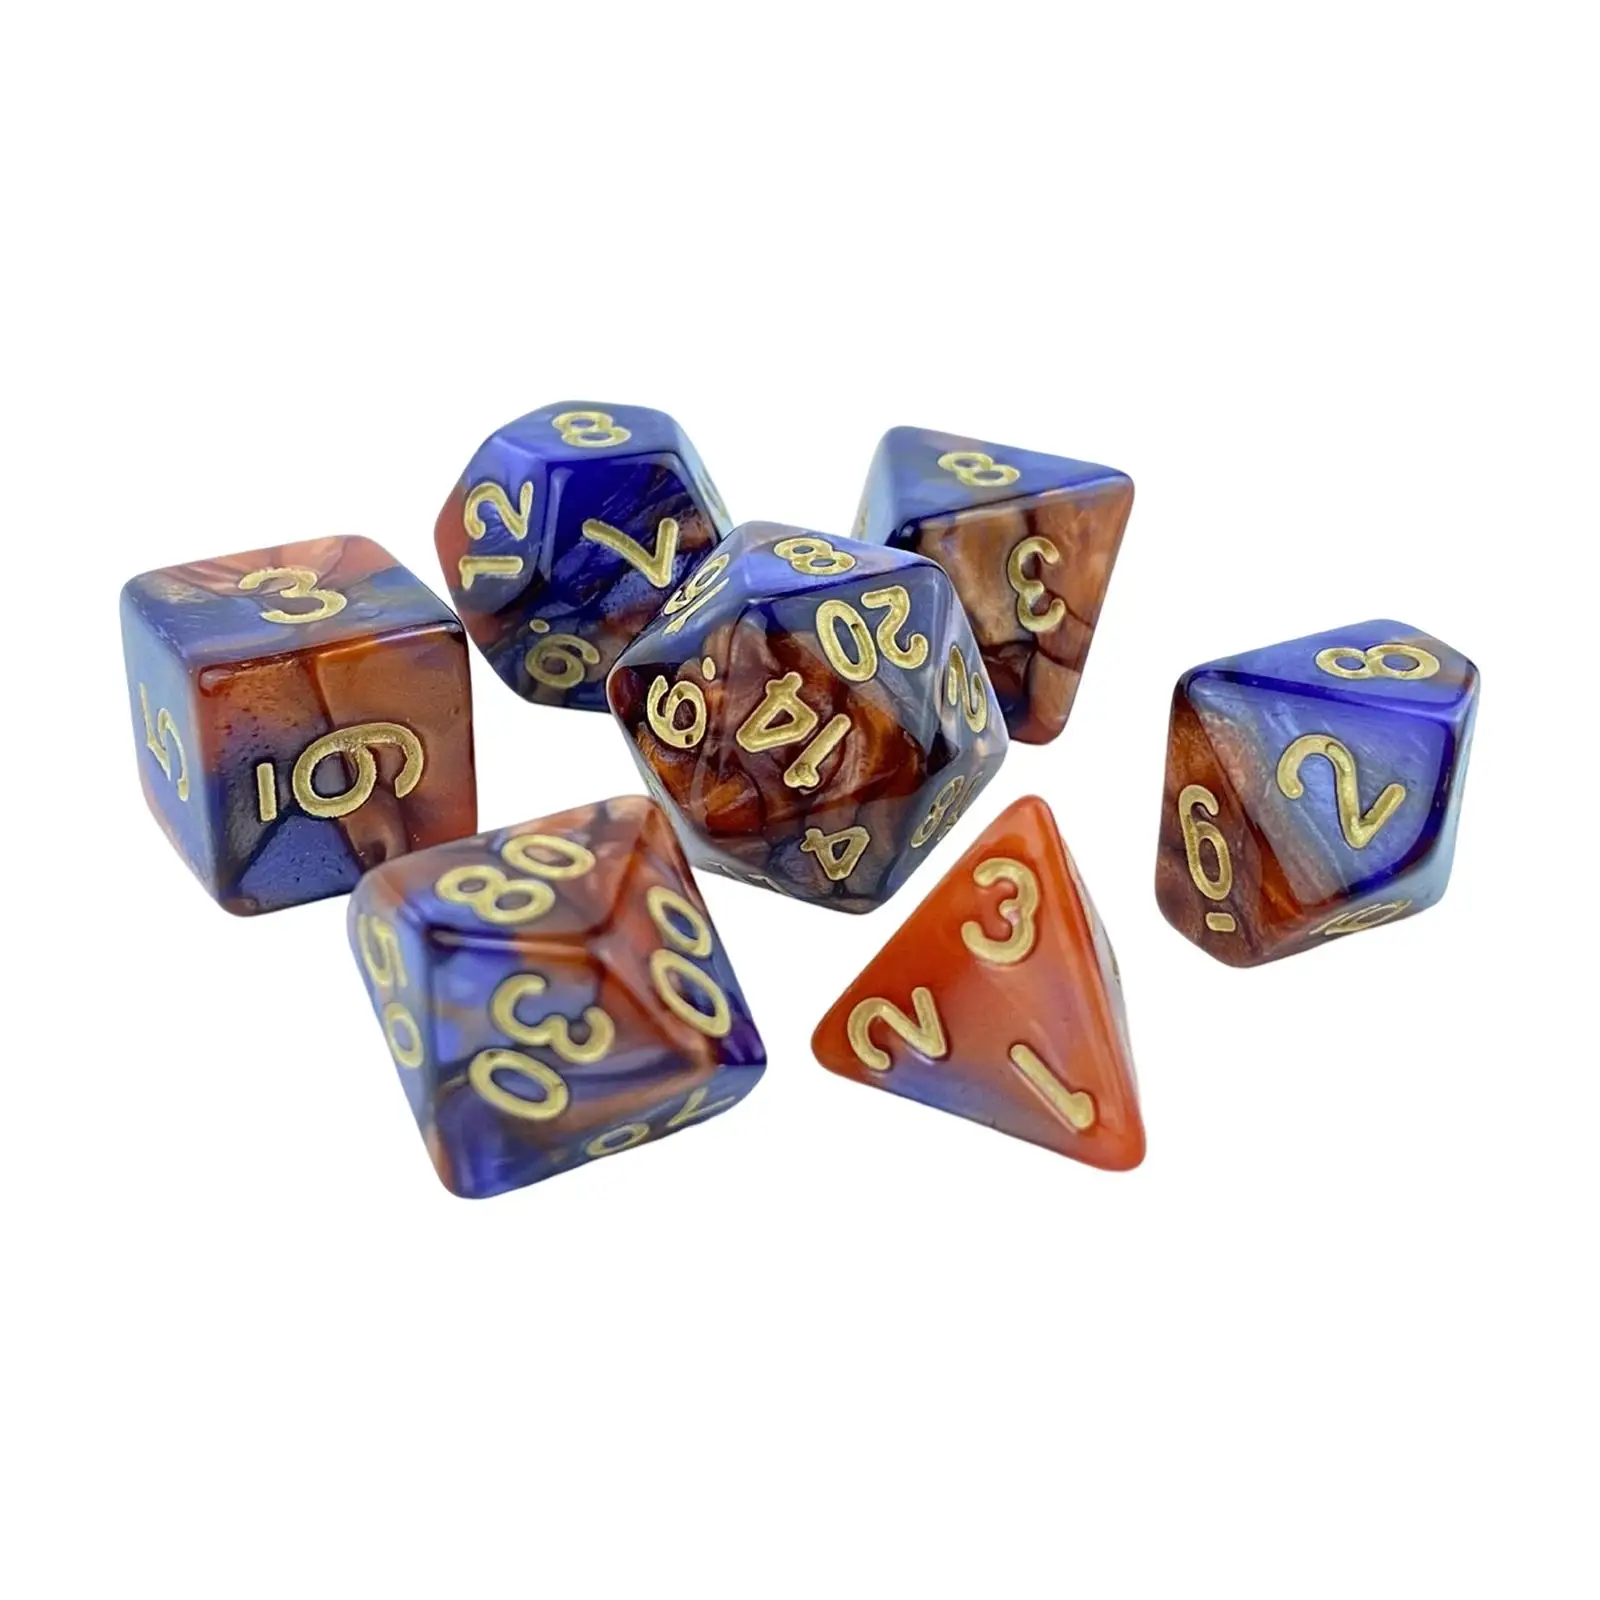 7 Pieces Polyhedral Dice Set Role Playing Dice Table Board Roll Playing Games for RPG Party Supply